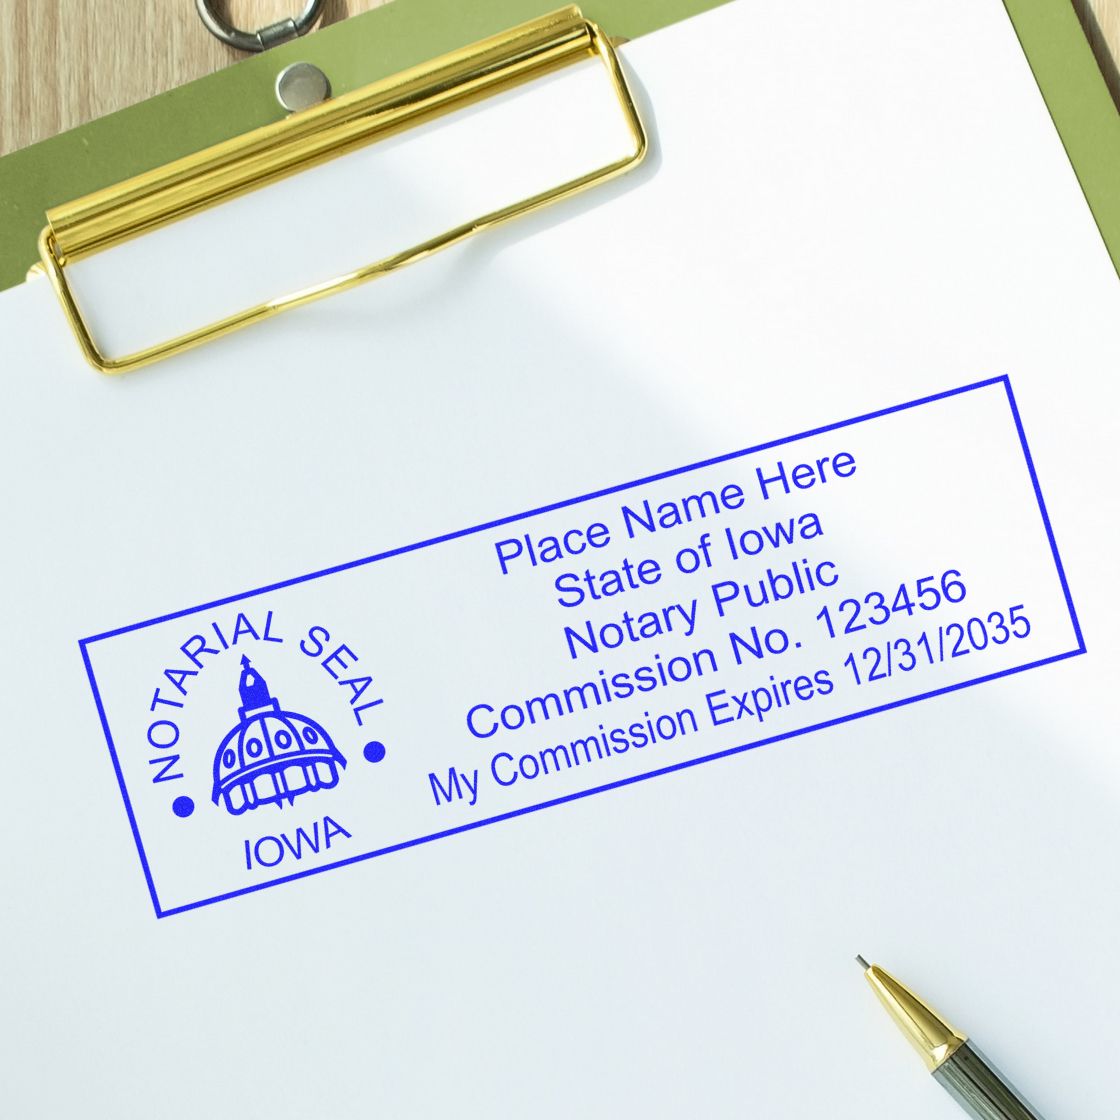 An alternative view of the Heavy-Duty Iowa Rectangular Notary Stamp stamped on a sheet of paper showing the image in use